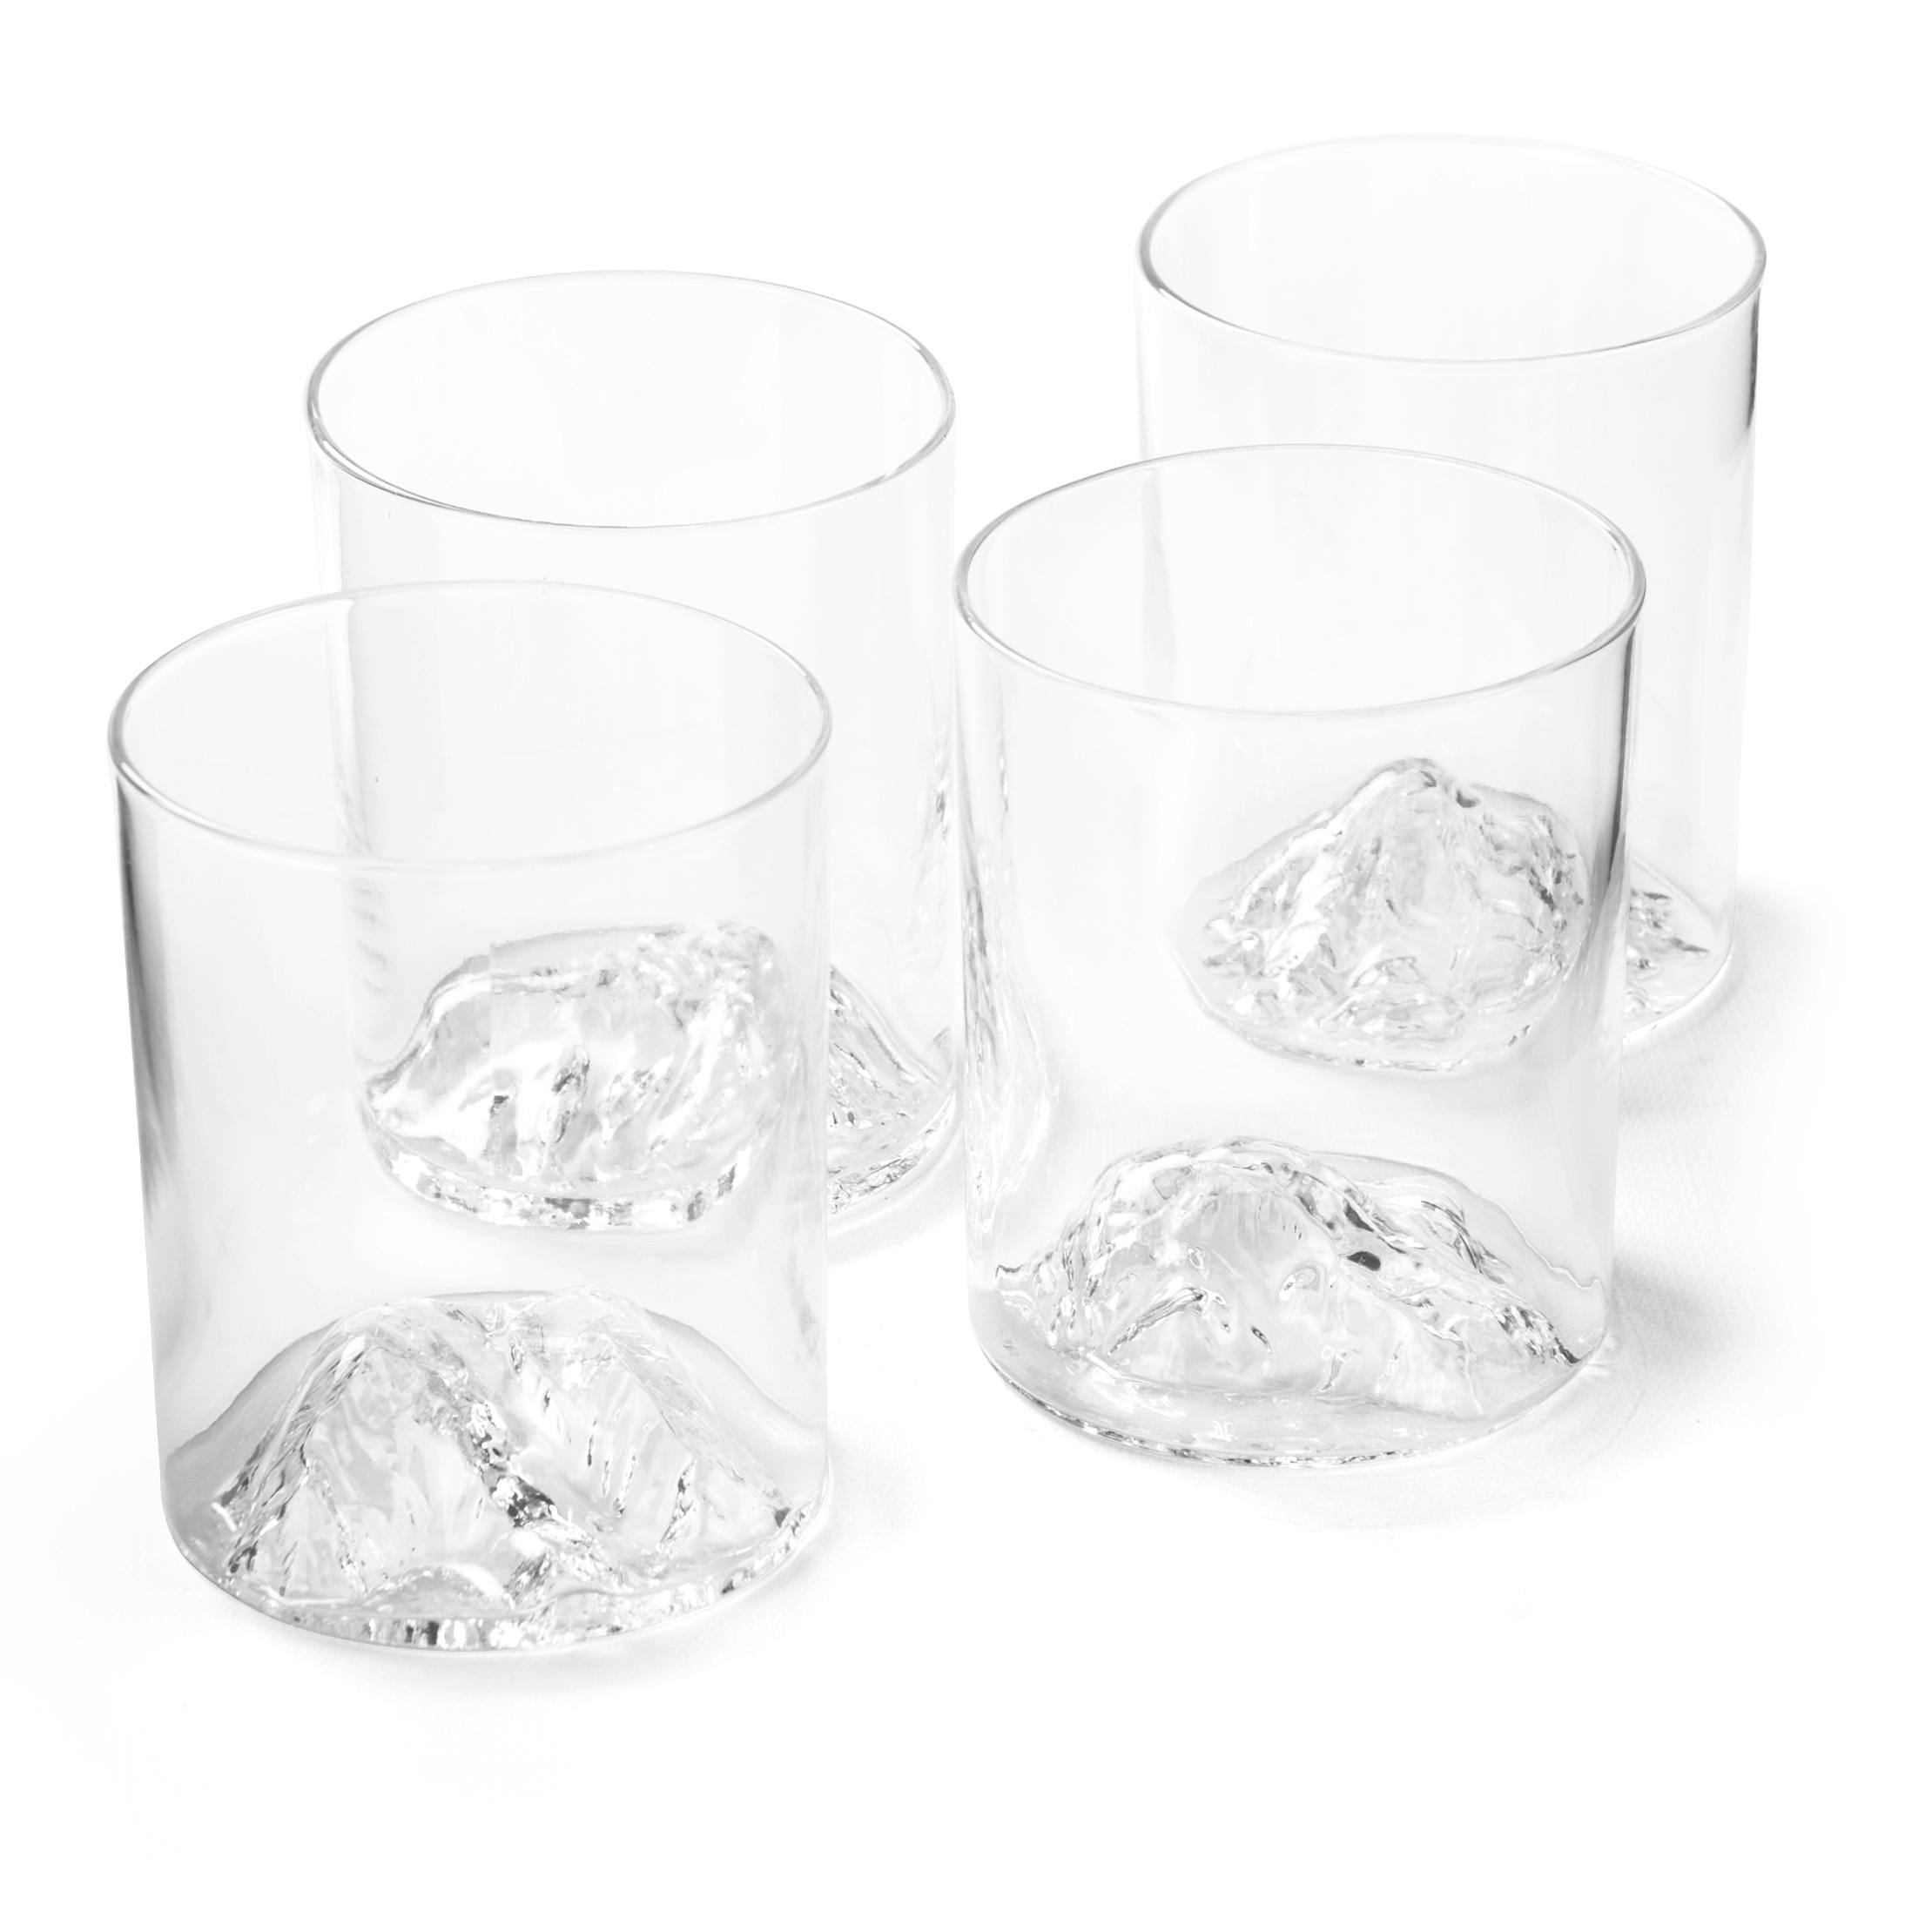 Send a Set of 2 Whiskey Glasses Online!